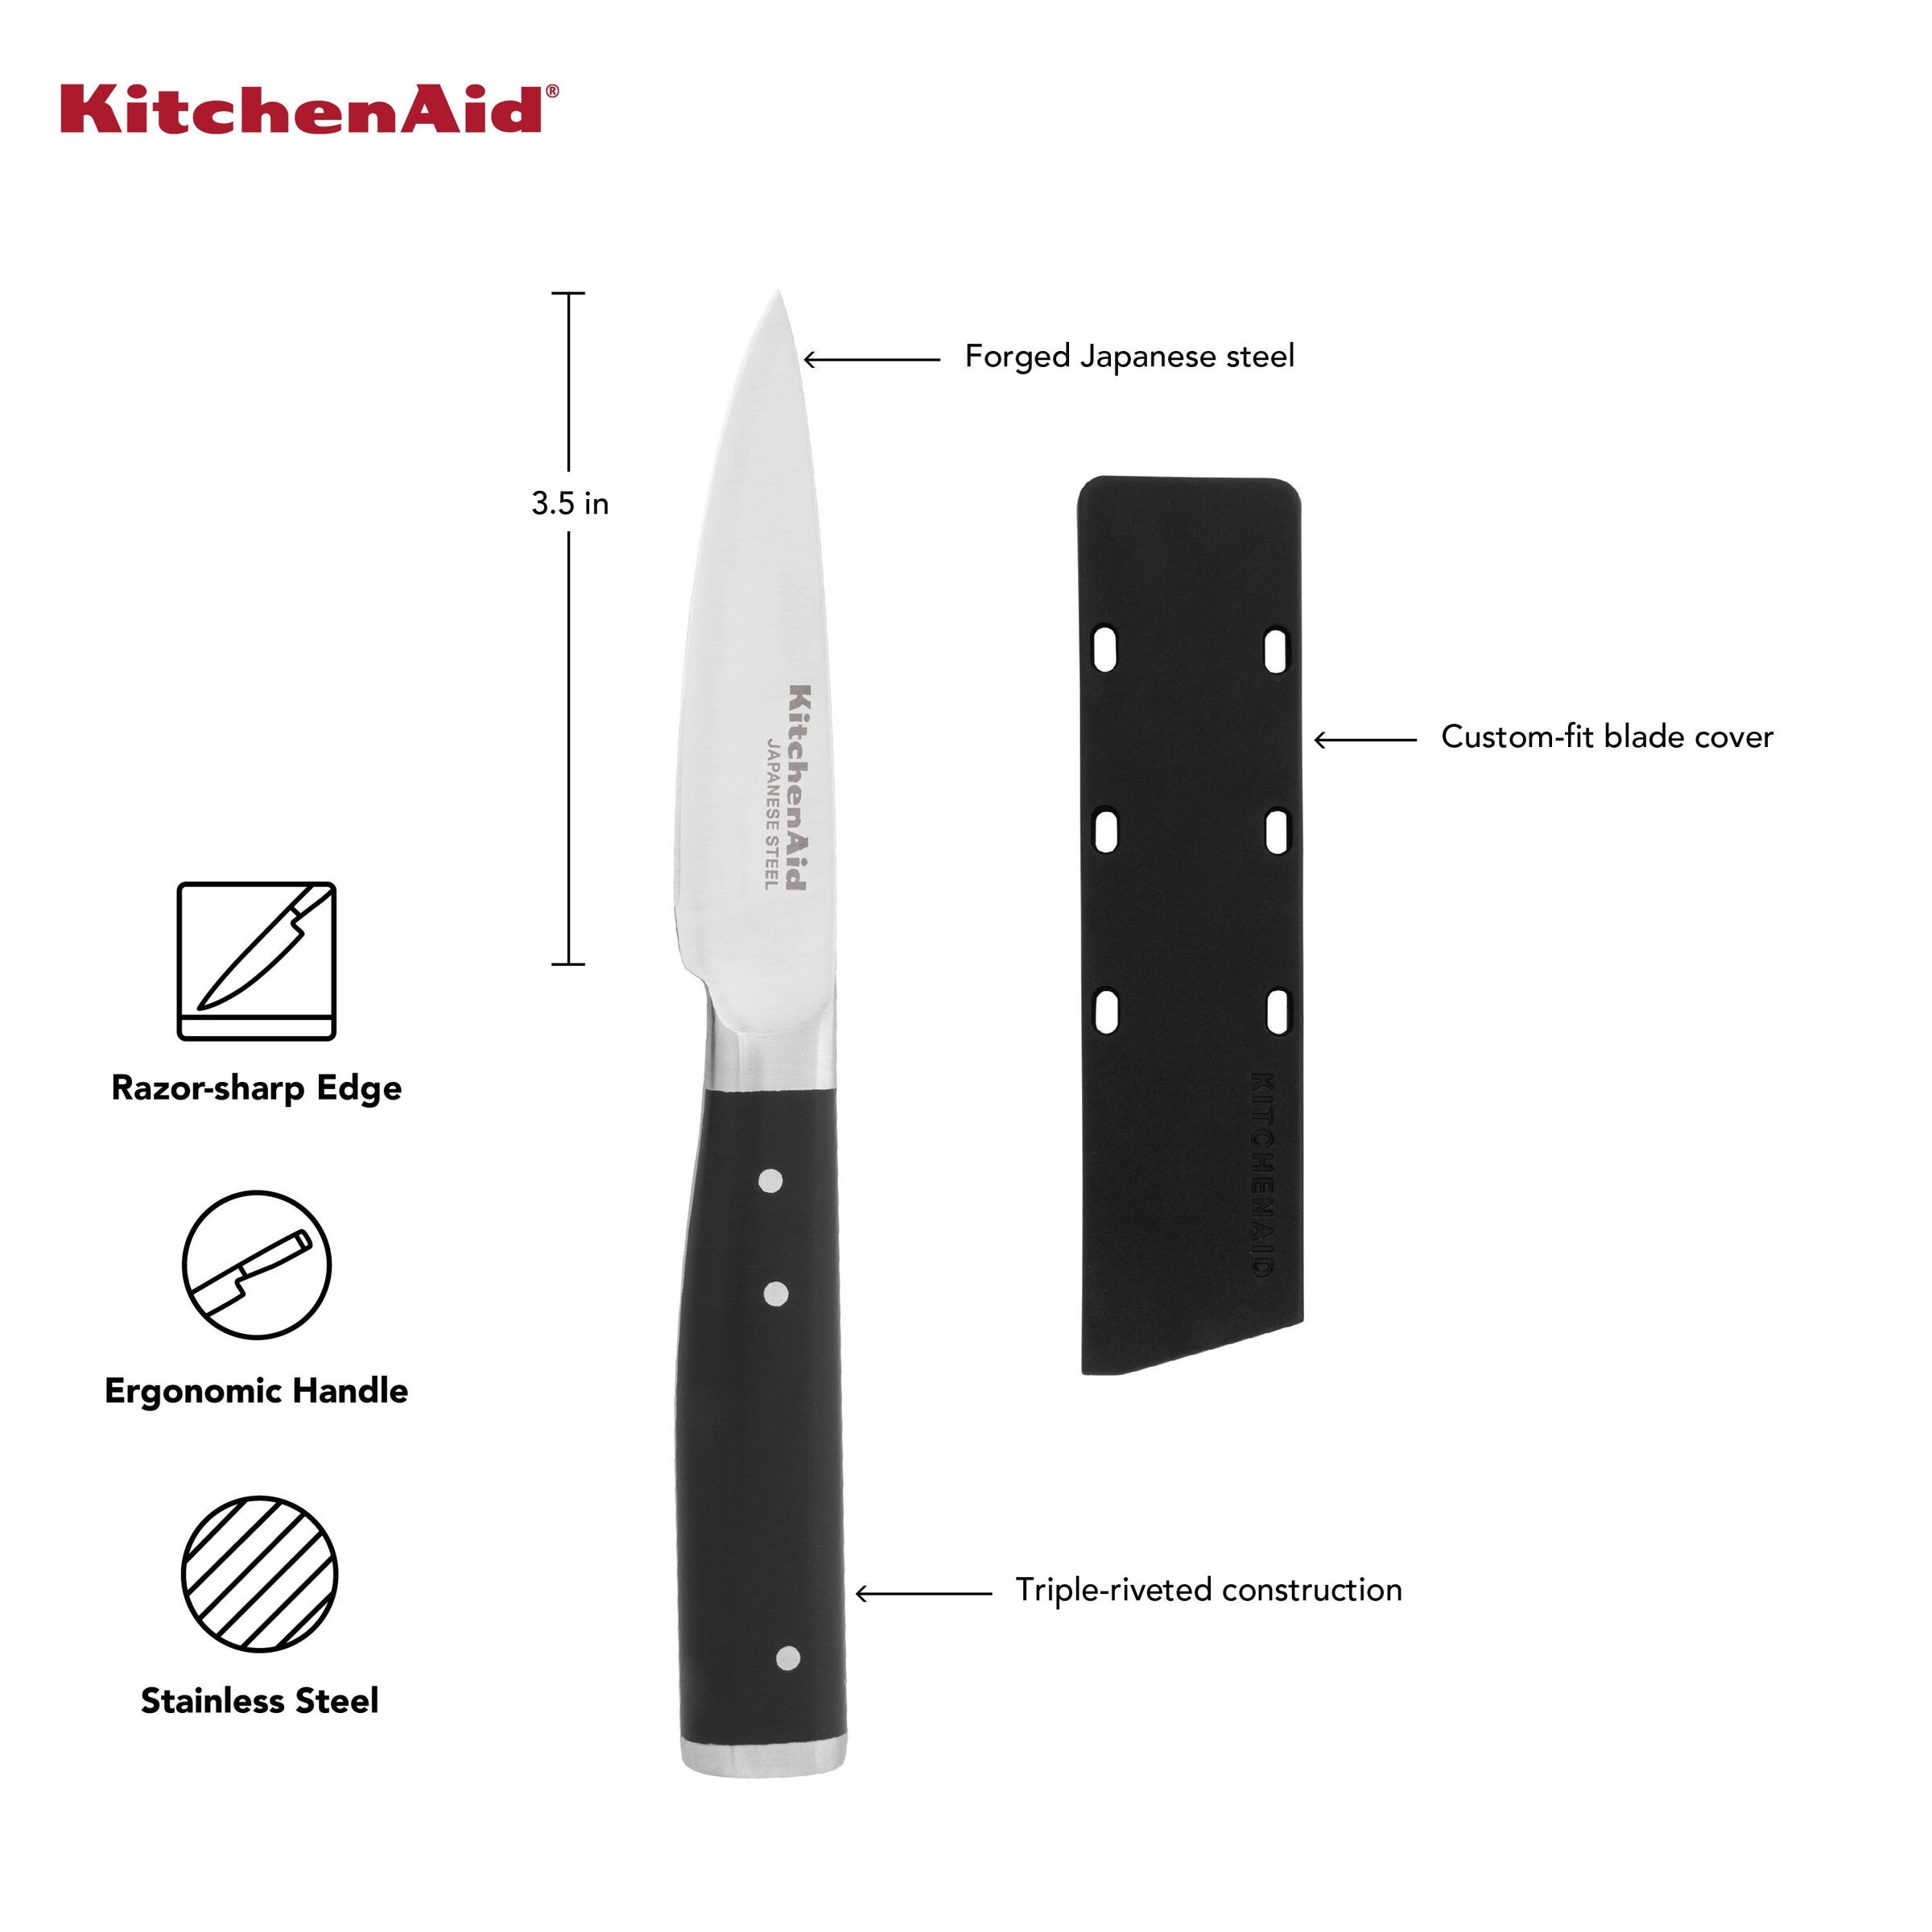 https://ak1.ostkcdn.com/images/products/is/images/direct/ddd7bba0f8ddcabfe2435903bcd56fb86581e755/KitchenAid-Gourmet-Forged-Paring-Knife%2C-3.5-Inch%2C-Black.jpg